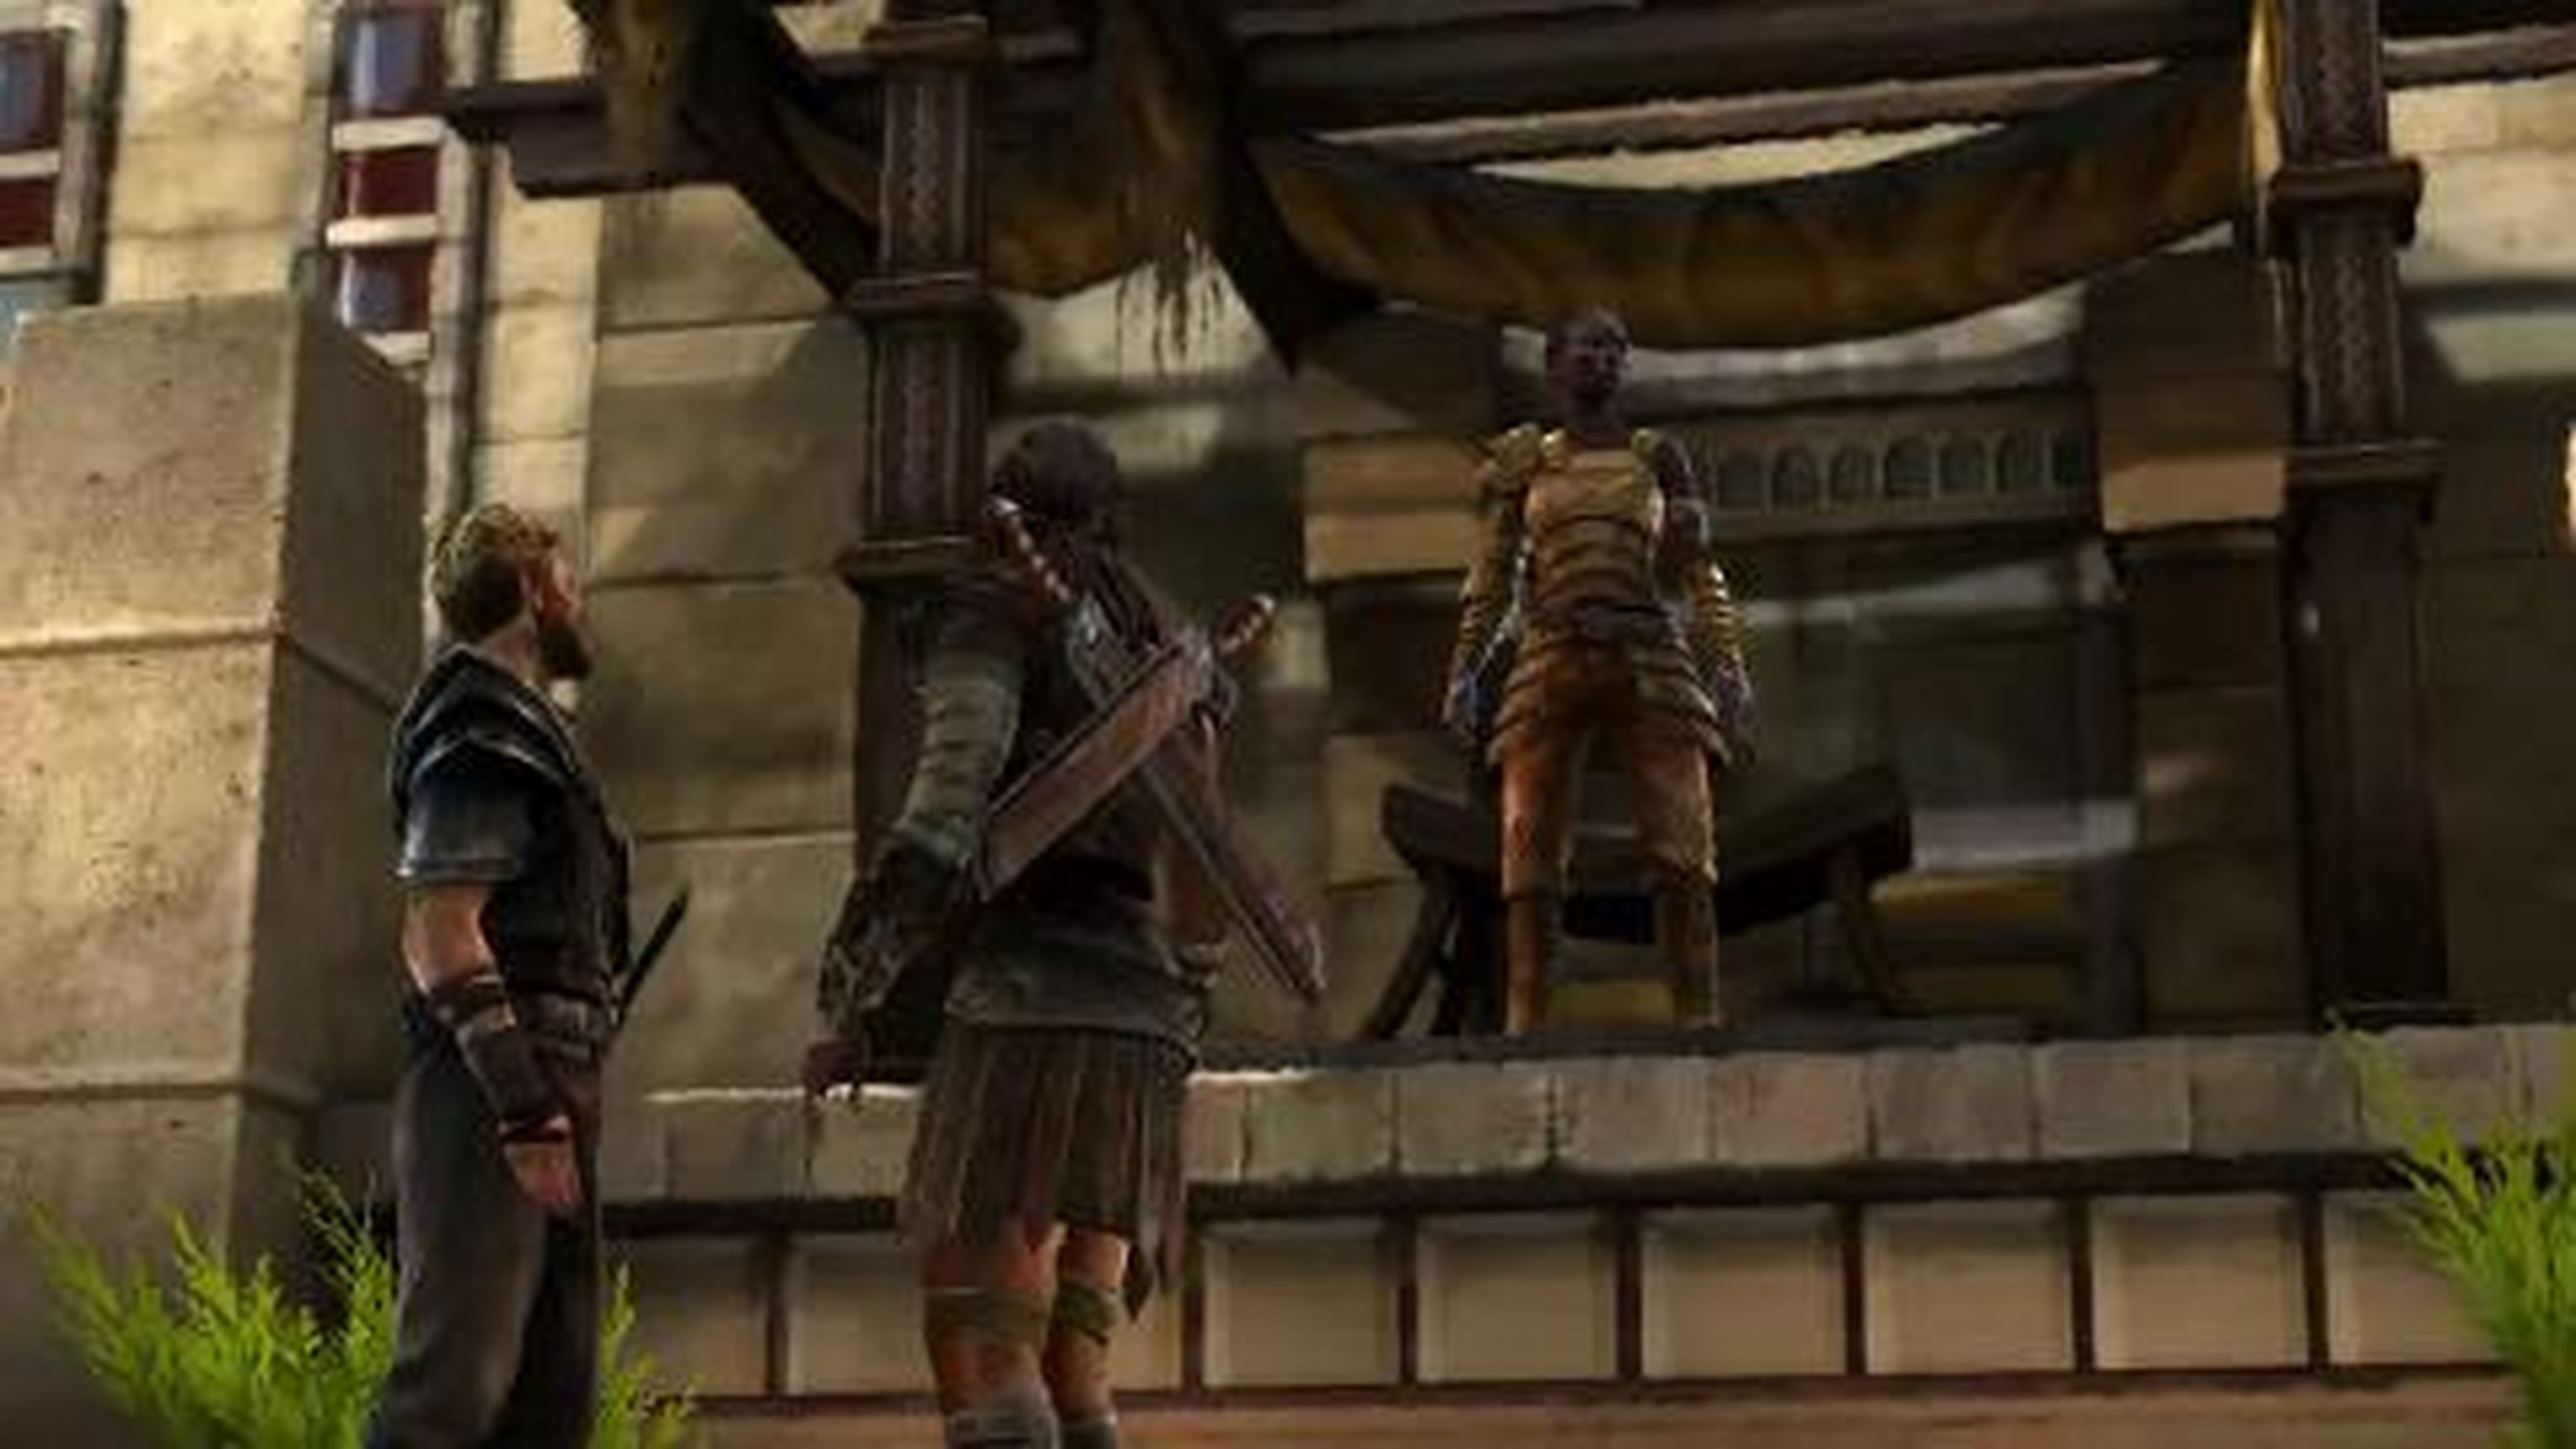 Game of Thrones- A Telltale Games Series - Episode 5- 'A Nest of Vipers' Trailer